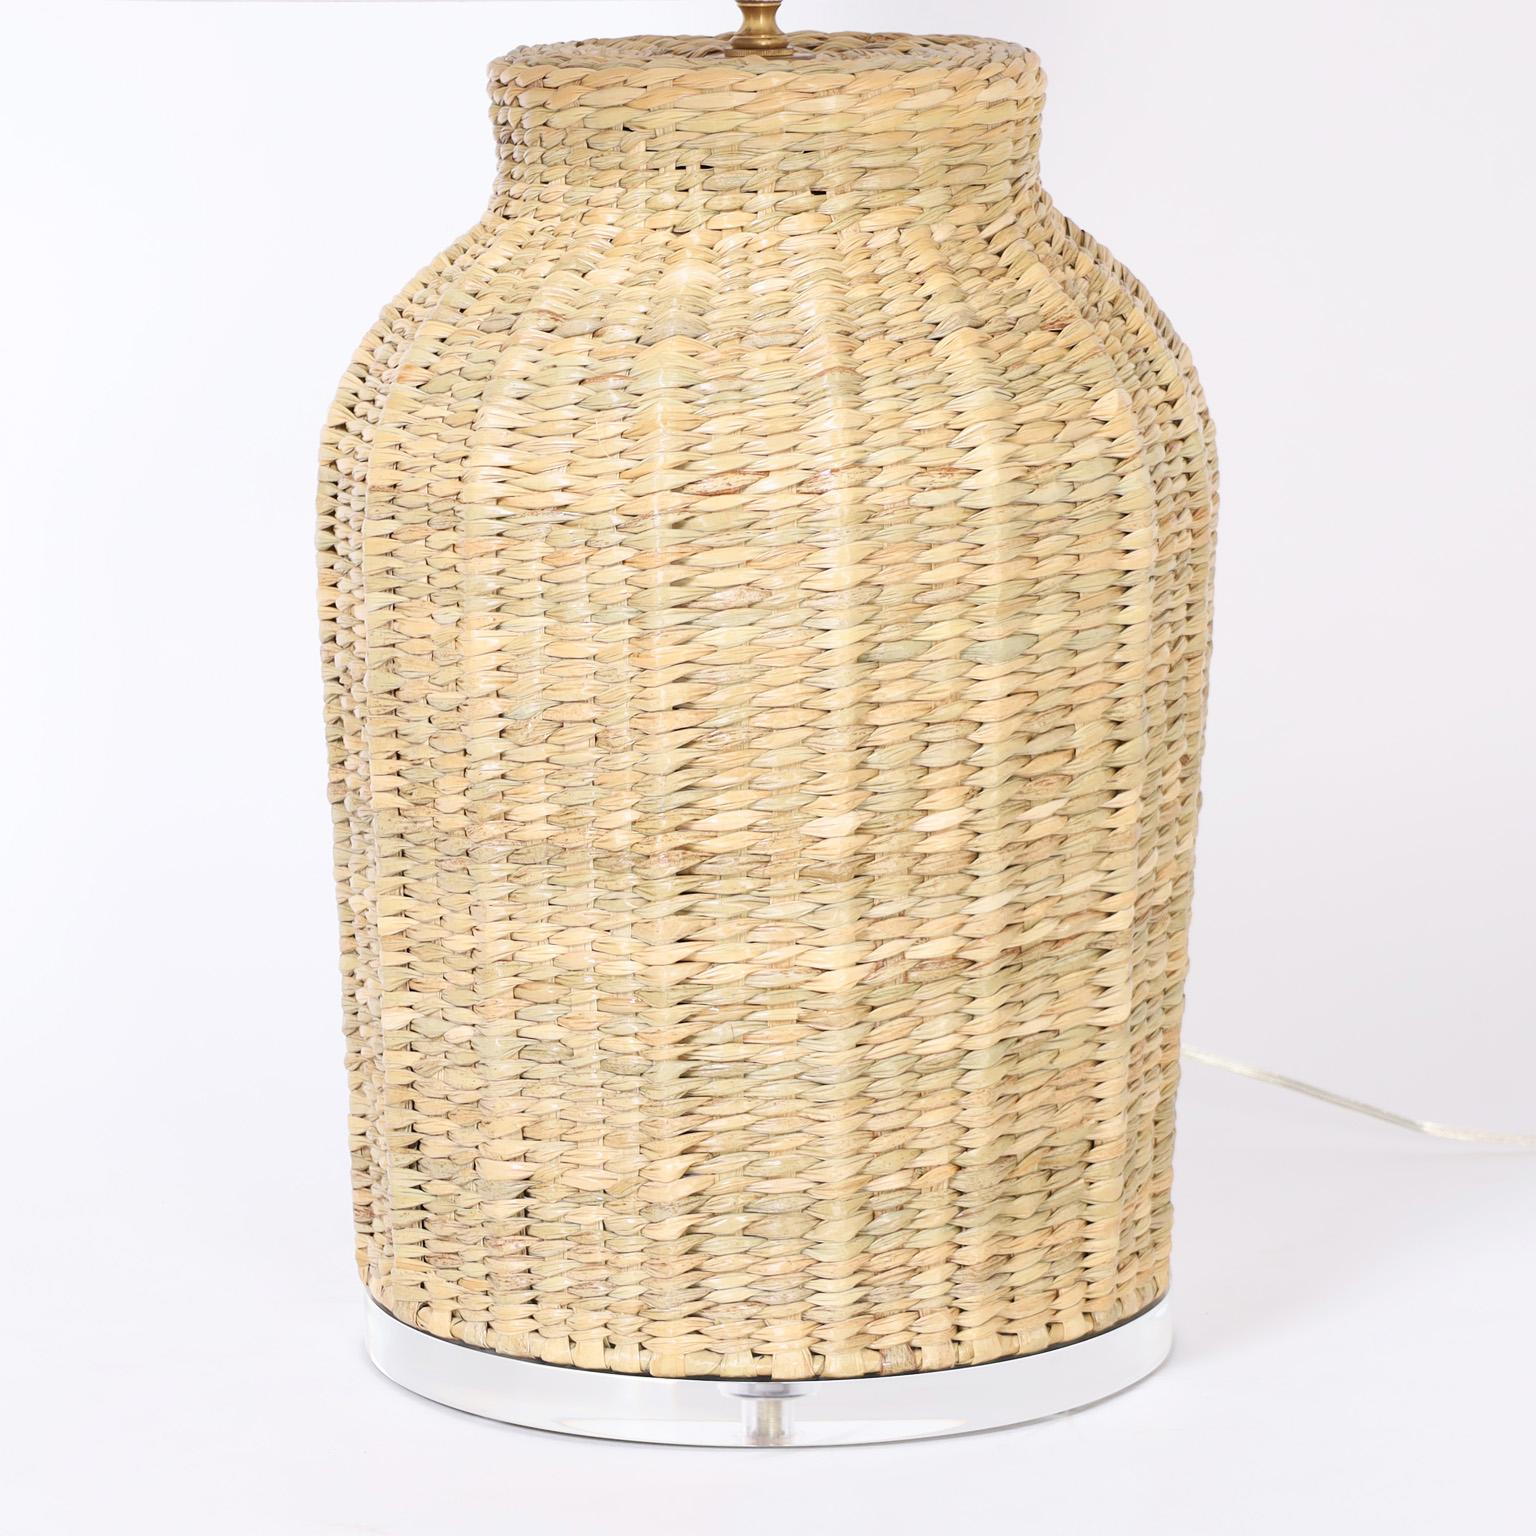 Organic Modern Pair of Wicker Bottle Form Table Lamps from the FS Flores Collection For Sale